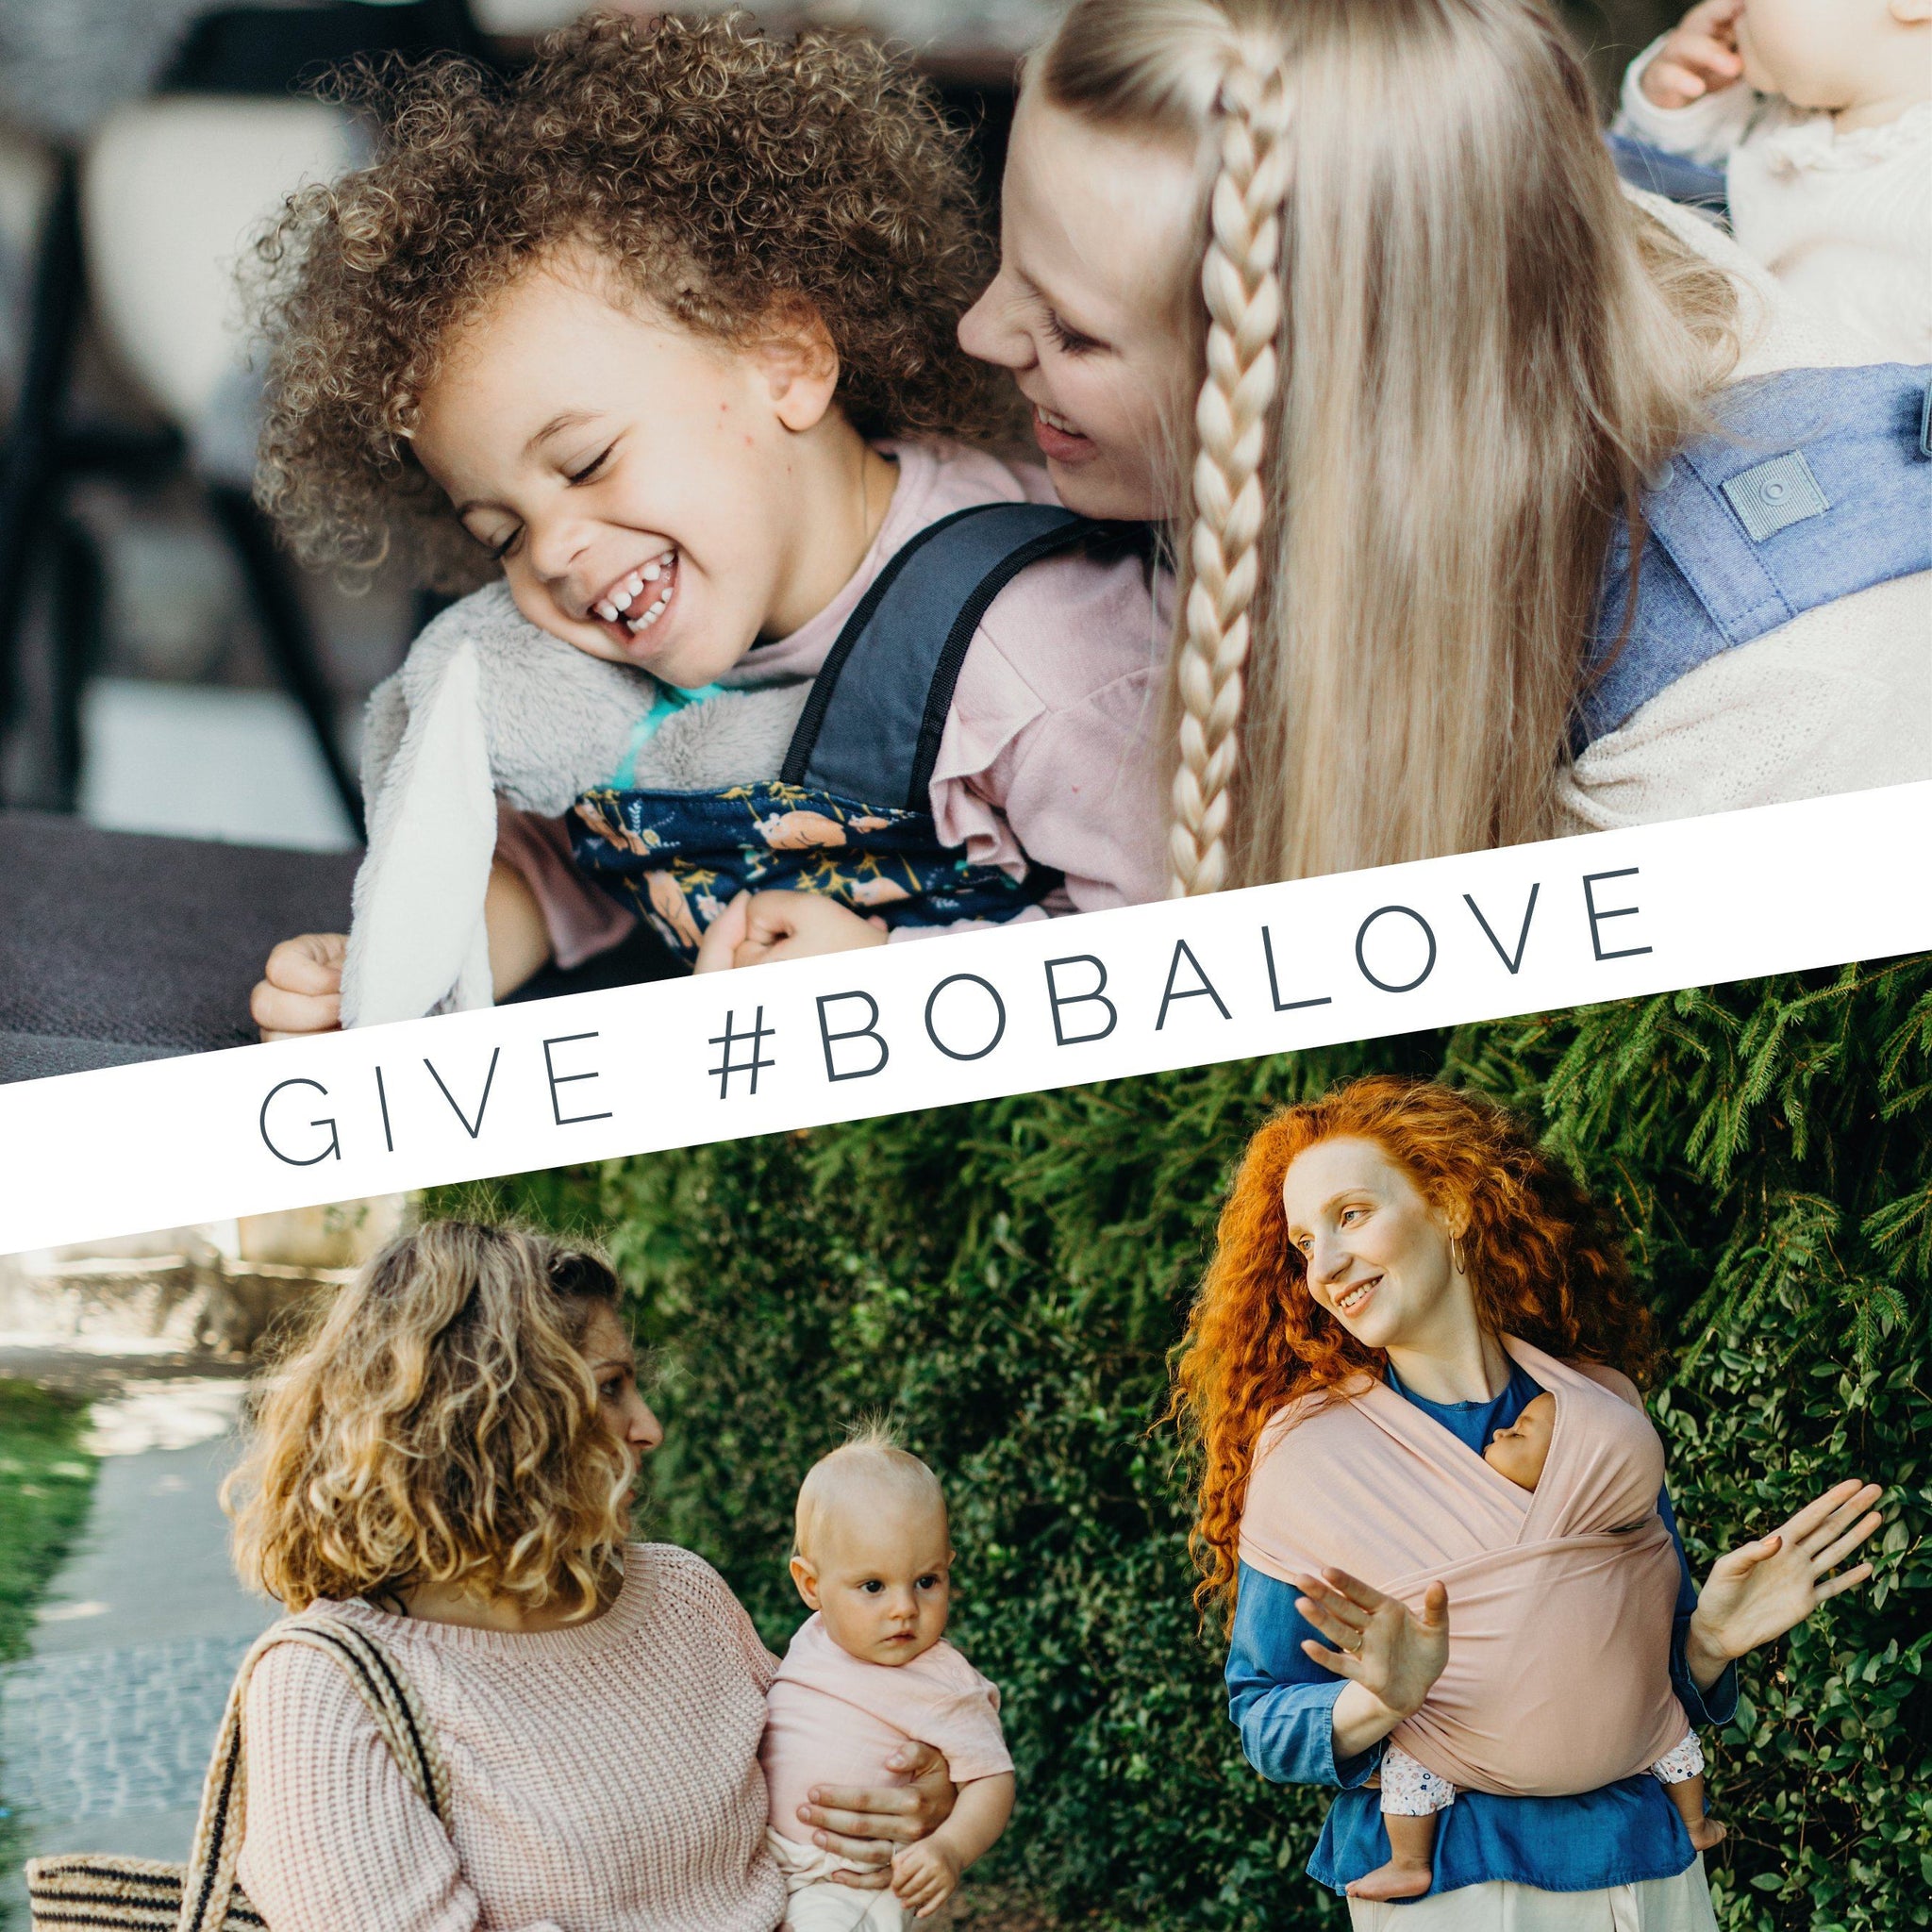 Text "Give #BobaLove" on top of two photos of babywearing moms and their kids